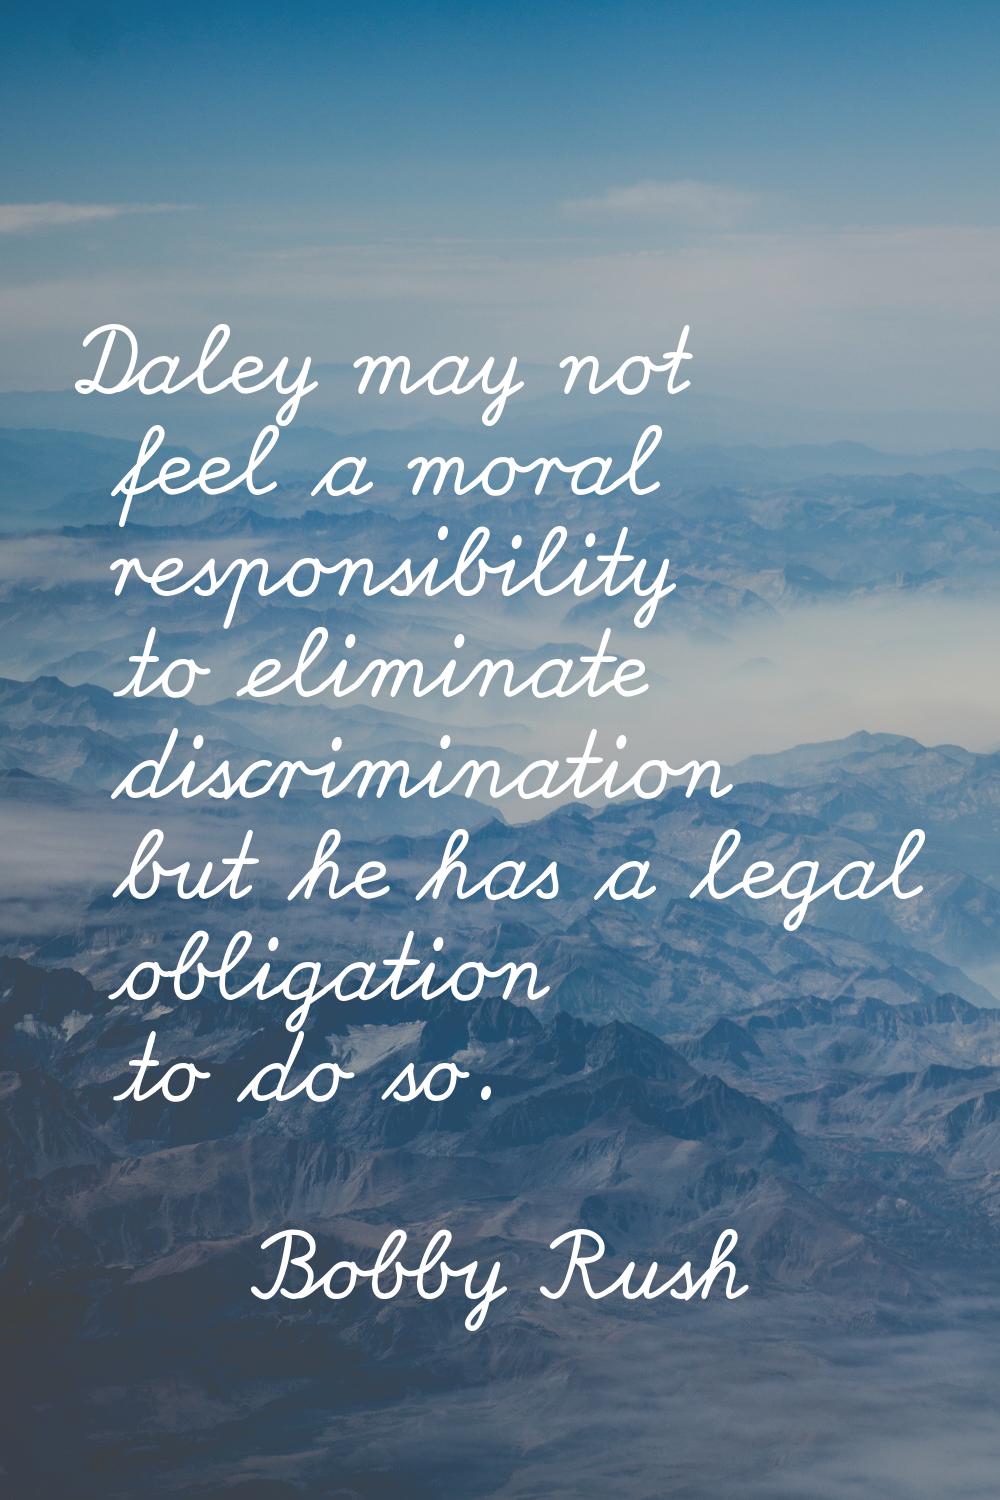 Daley may not feel a moral responsibility to eliminate discrimination but he has a legal obligation